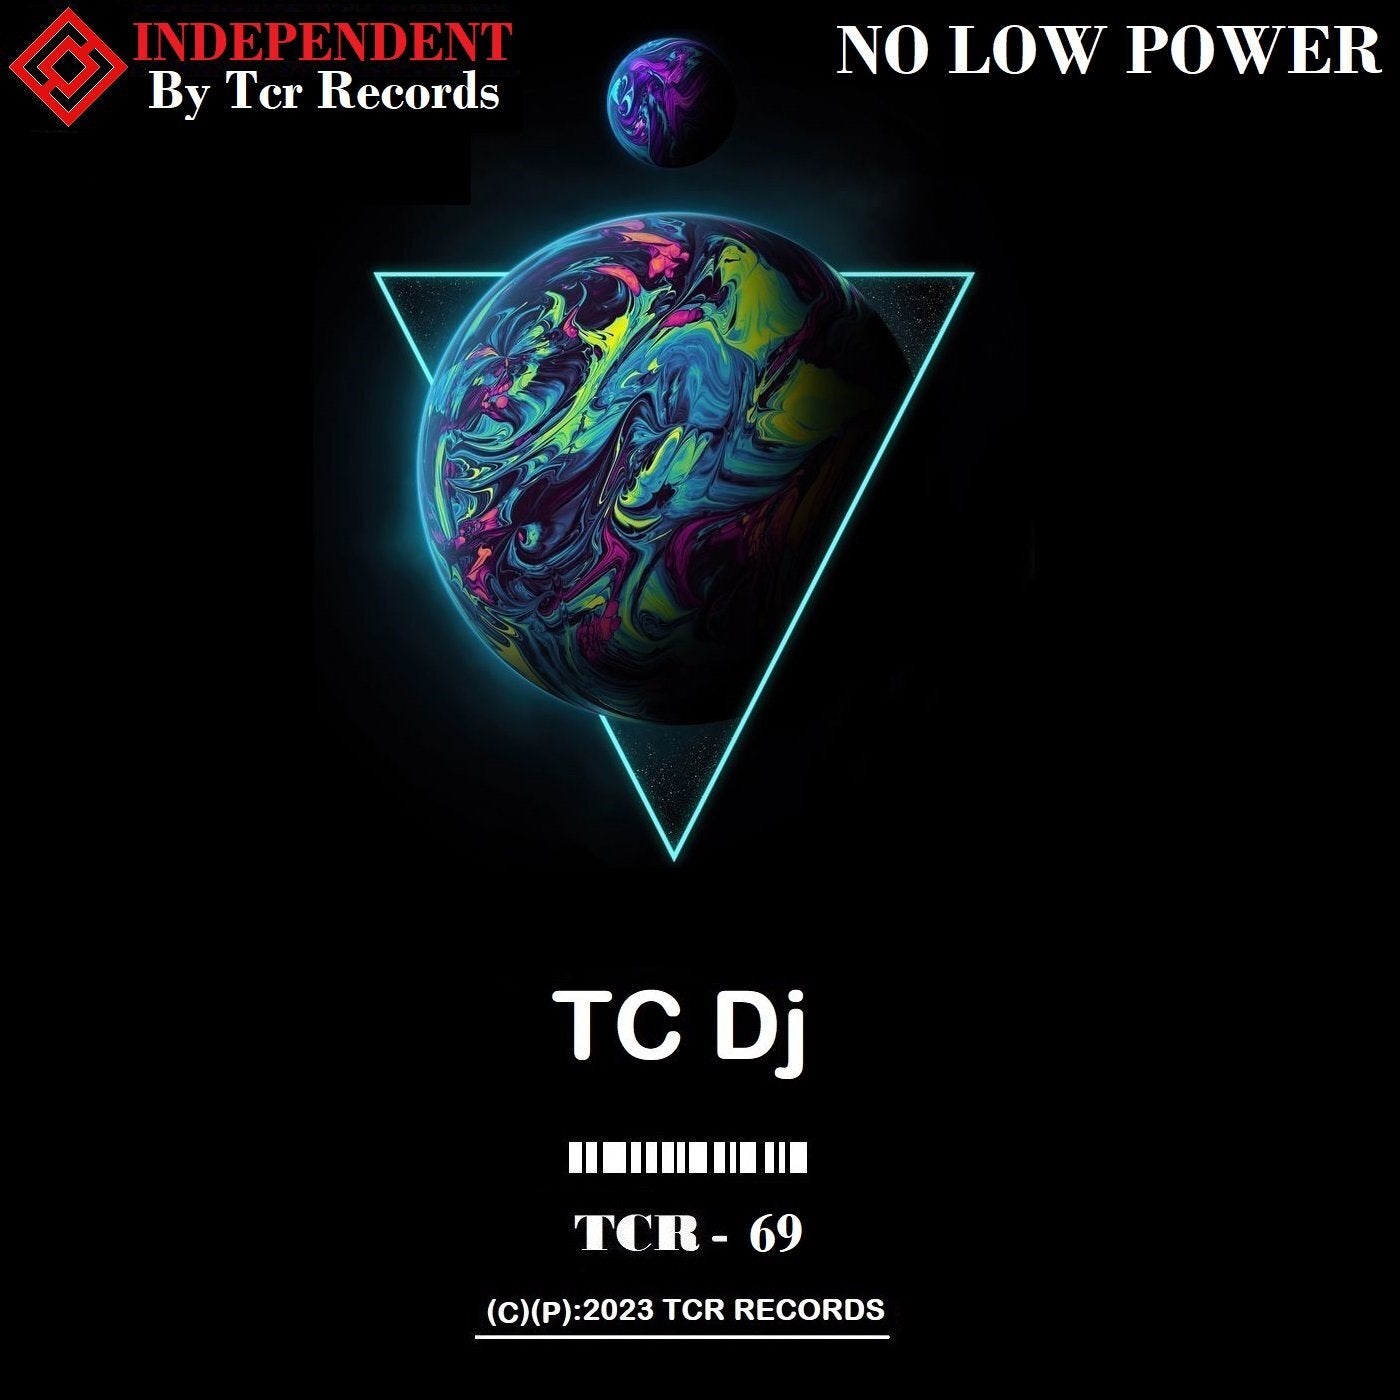 No Low Power